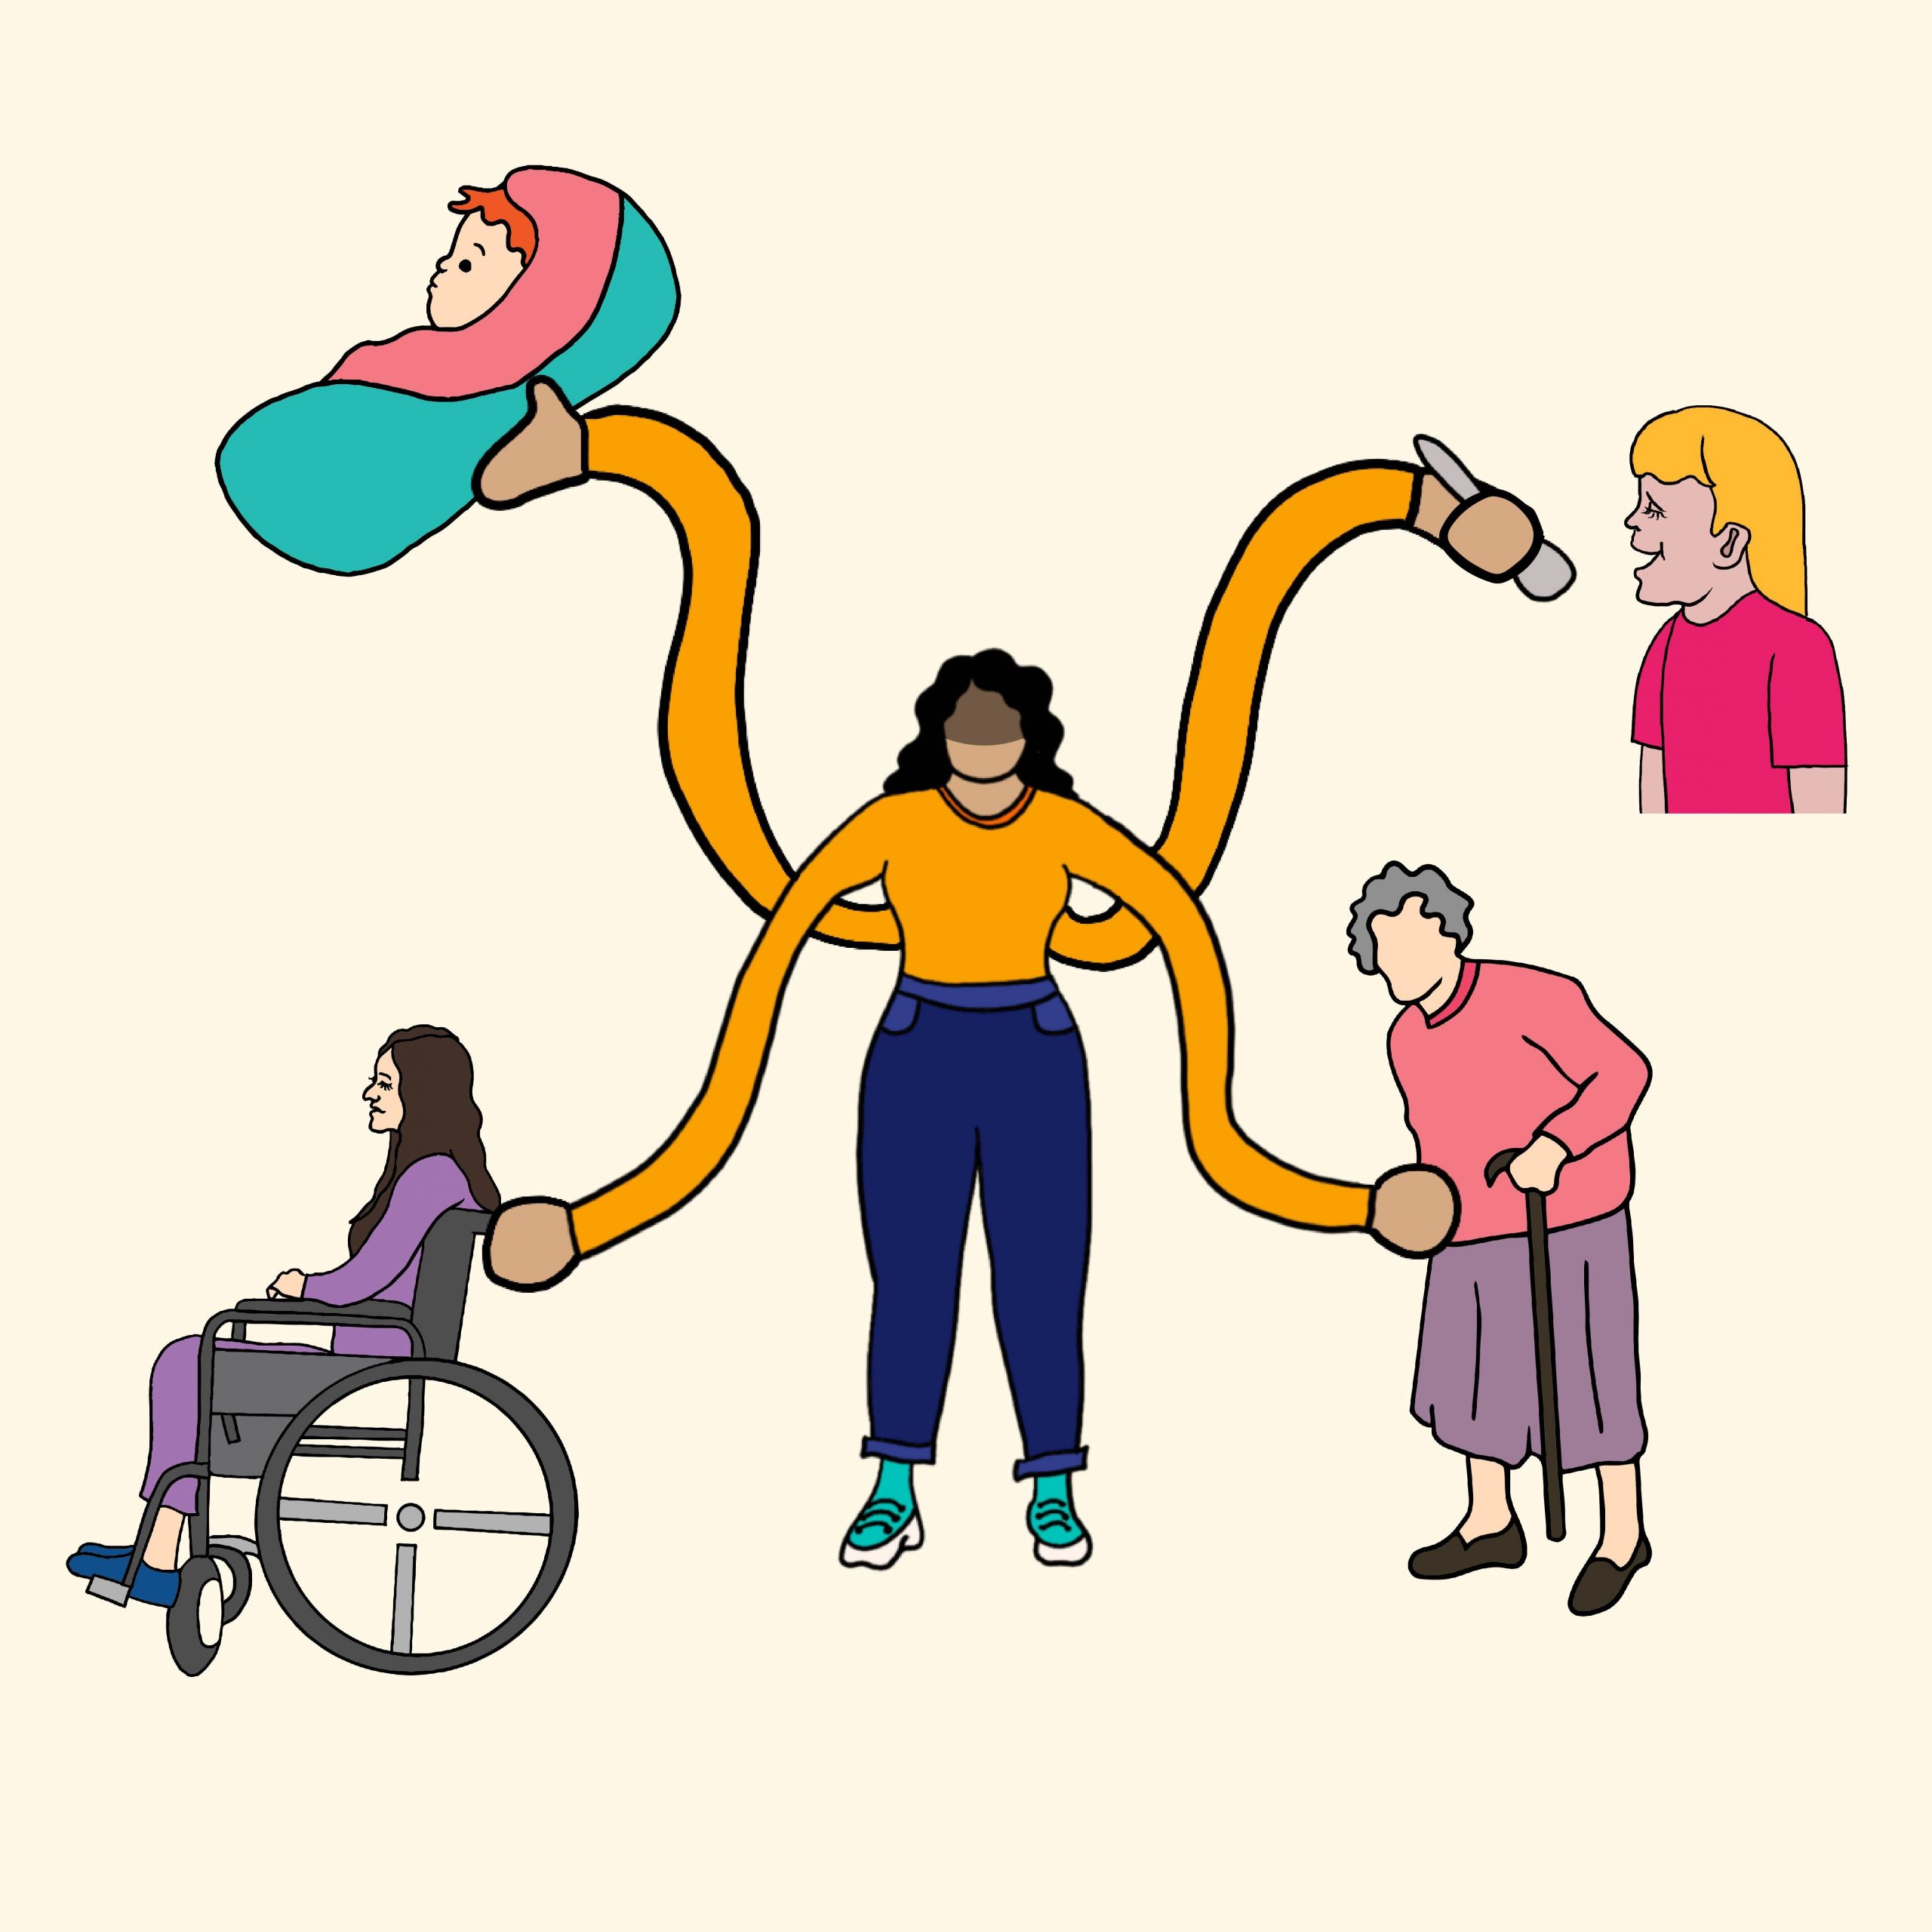 Illustration of a woman with arms stretched in all directions, trying to care for a baby, a child, a person in a wheelchair, and an elderly person all at once.